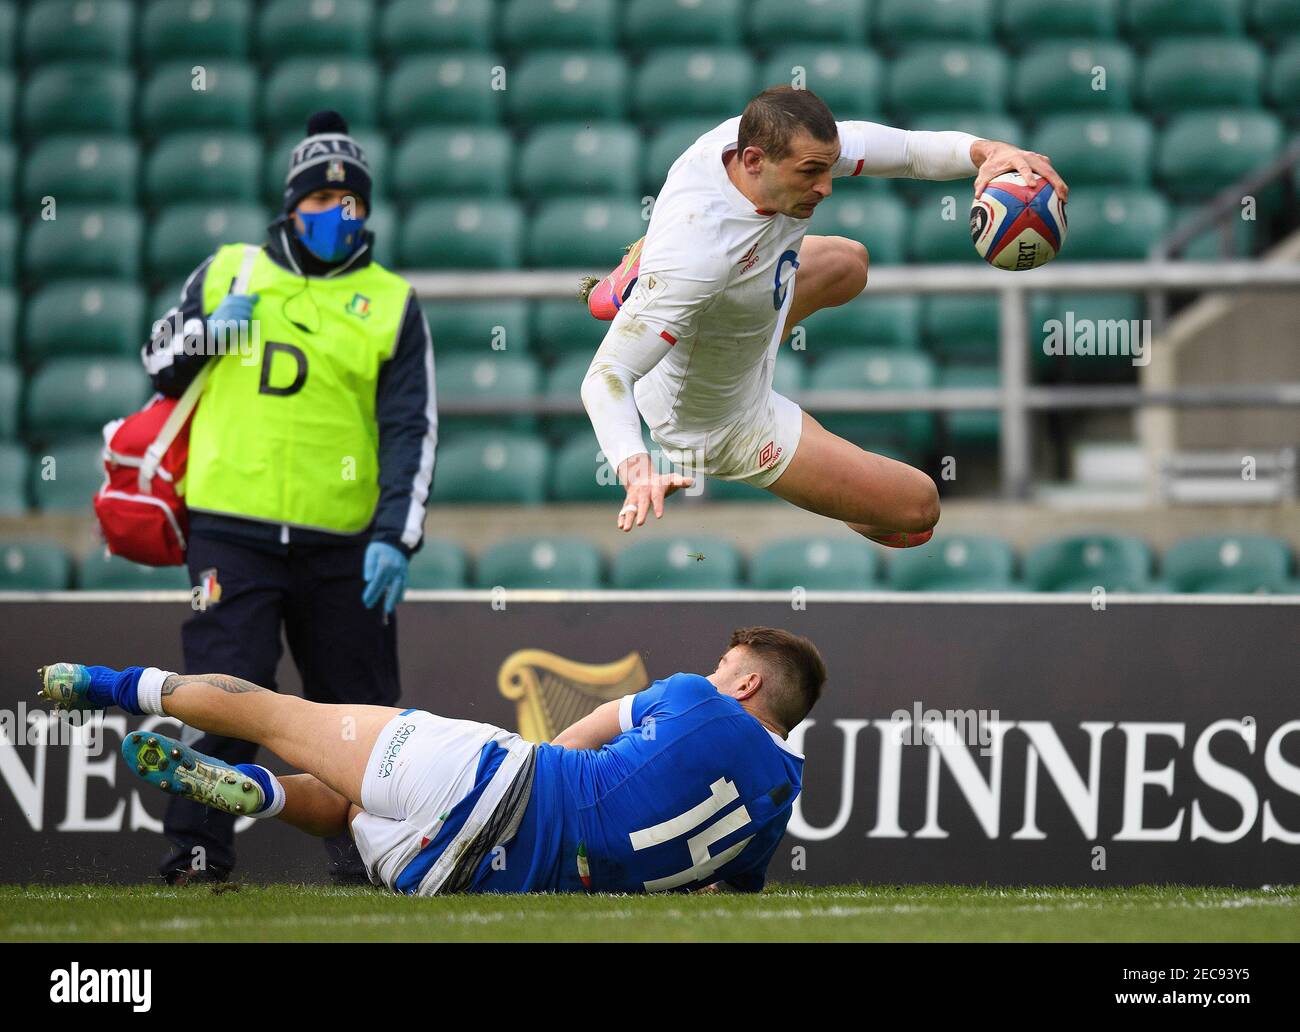 Twickenham Stadium, 13th Feb 2021  England's Jonny May scores a spectacular try during their Six Nations match against Italy.  Picture Credit : © Mark Pain / Alamy Live News Stock Photo